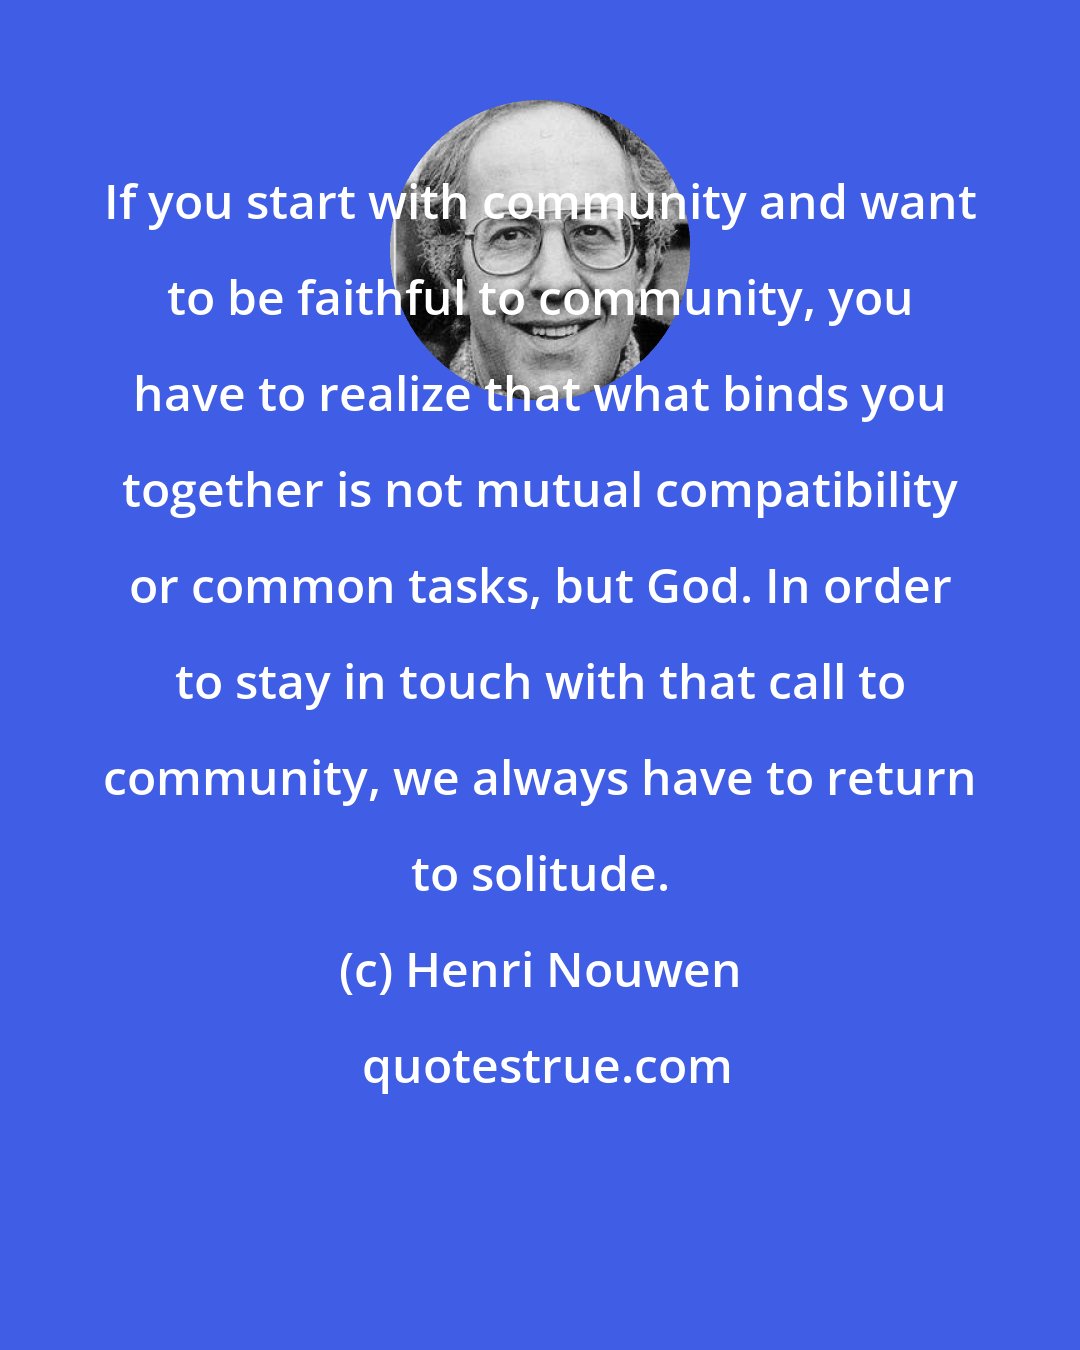 Henri Nouwen: If you start with community and want to be faithful to community, you have to realize that what binds you together is not mutual compatibility or common tasks, but God. In order to stay in touch with that call to community, we always have to return to solitude.